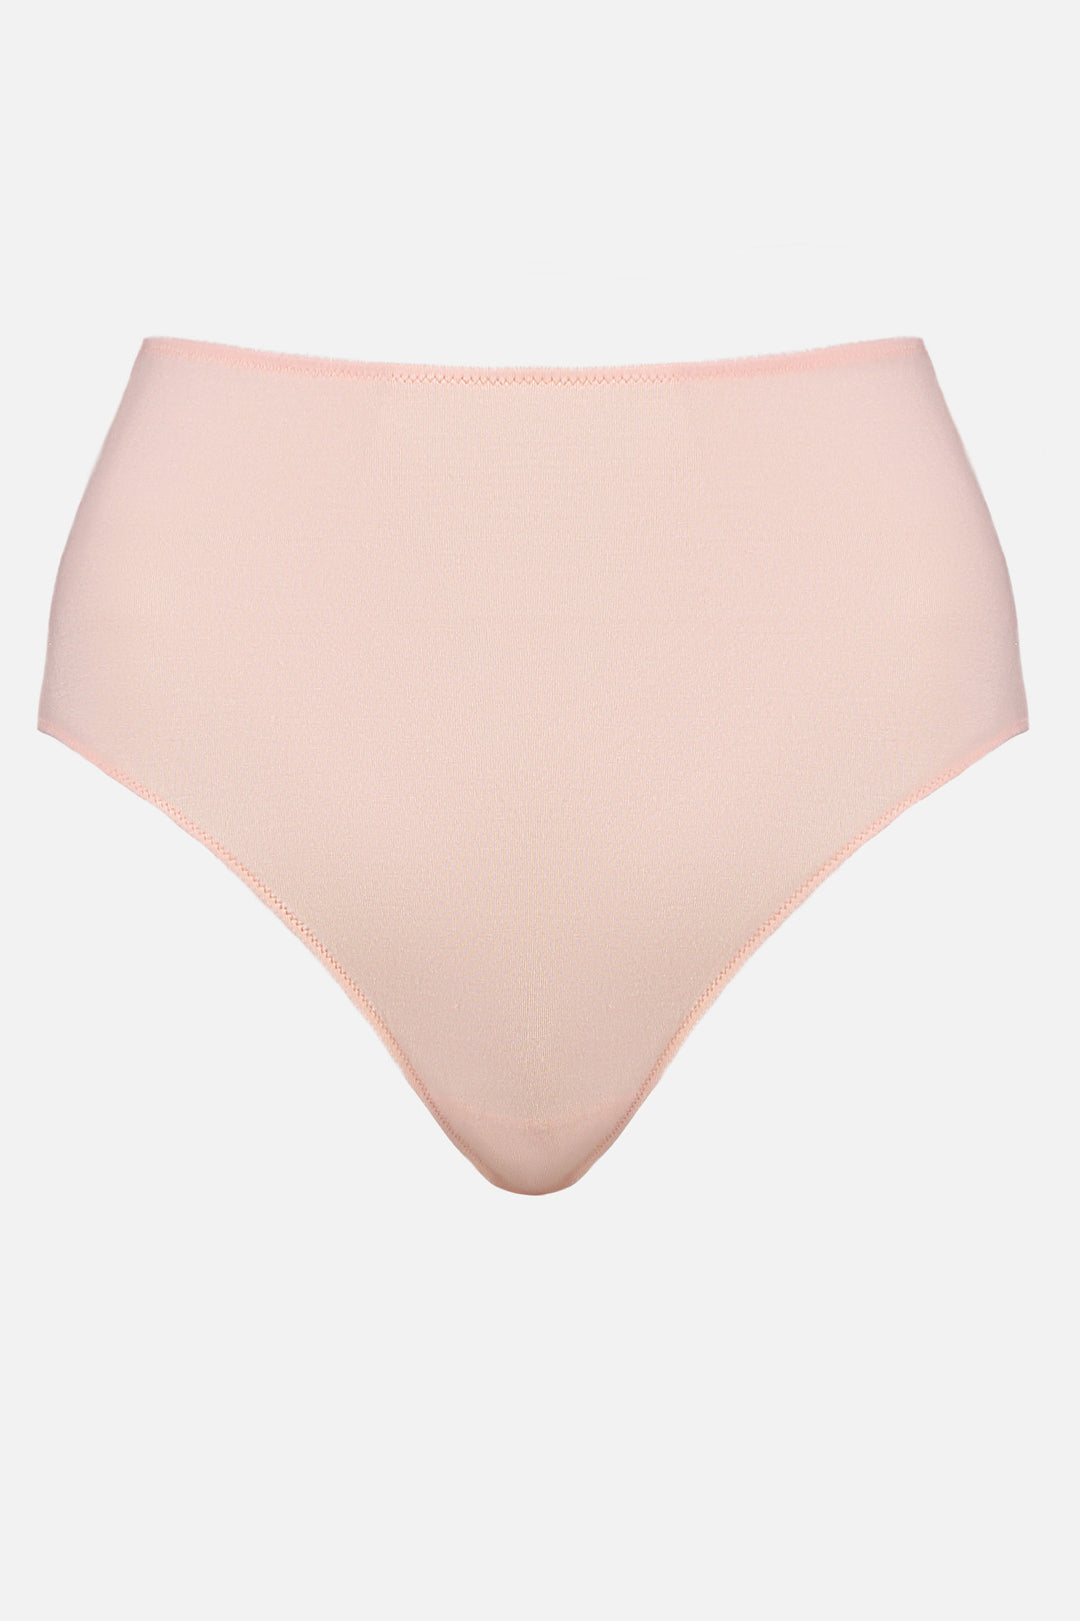 Videris Lingerie high waist knicker in rosy pink TENCEL™ cut to follow the natural curve of your hips